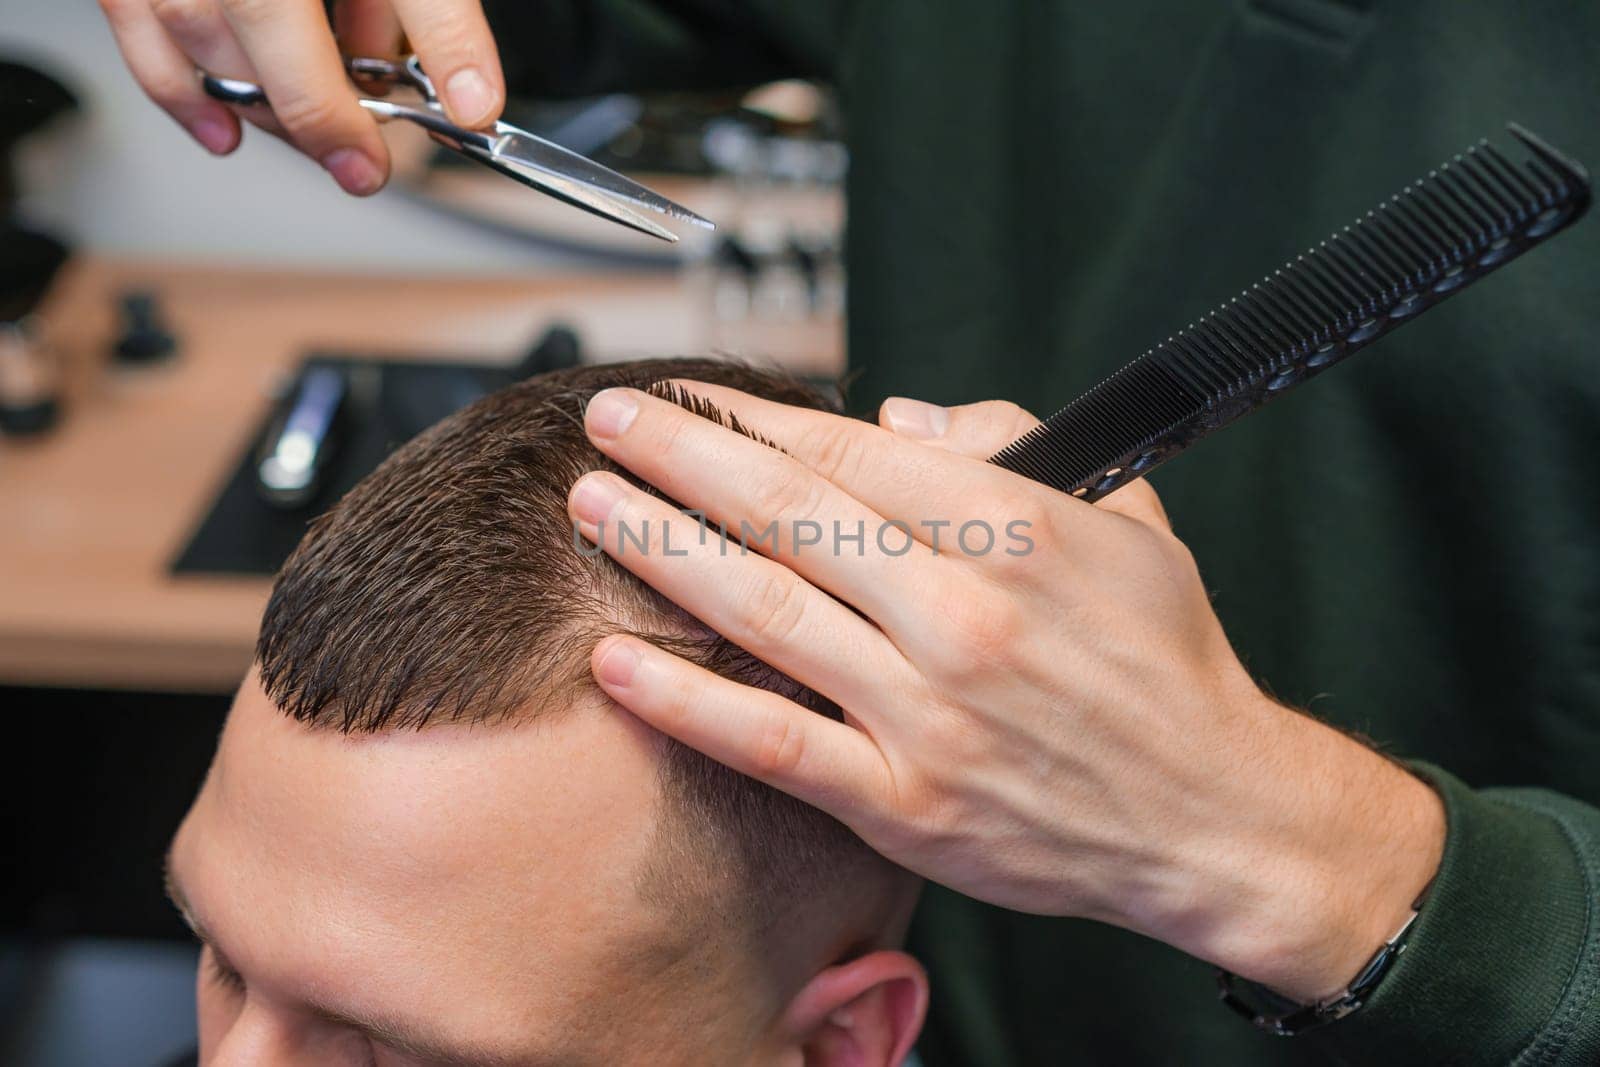 Hairstylist carefully cuts the brunette hair of the client with scissors at the barbershop.